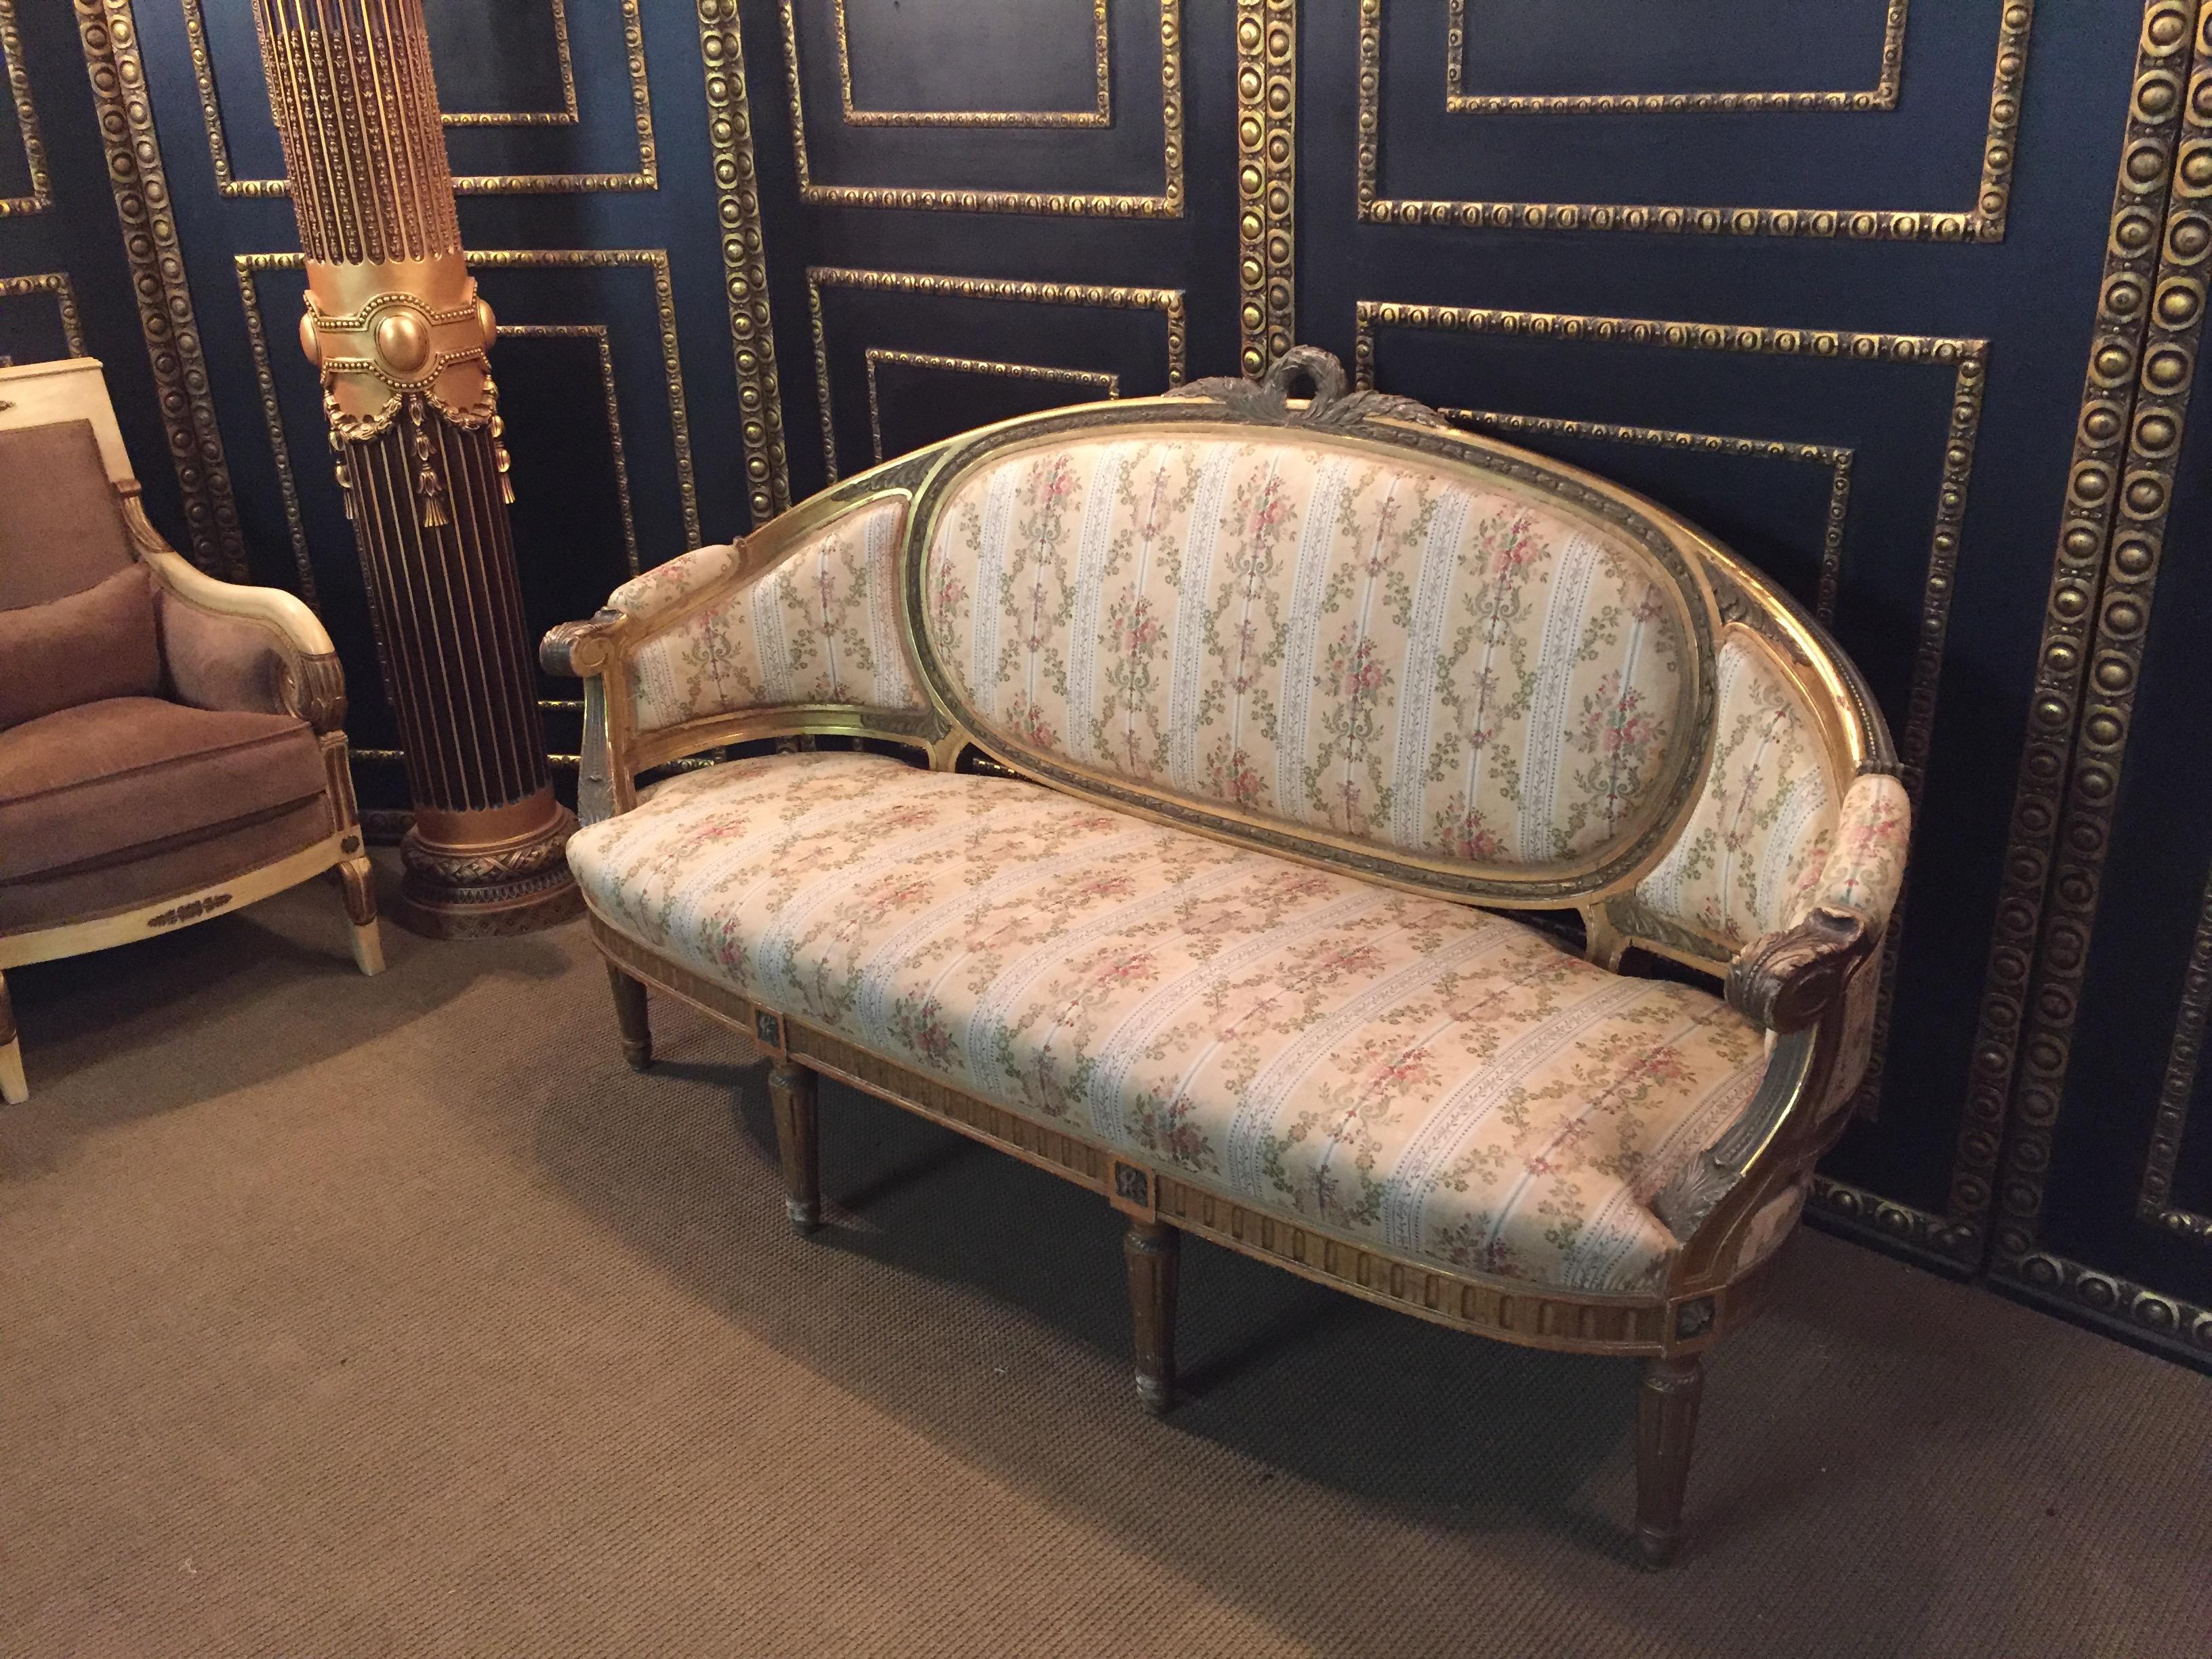 French 19th Century Sofa in Louis XVI Style, Solid Beech Wood Poliment Gilded